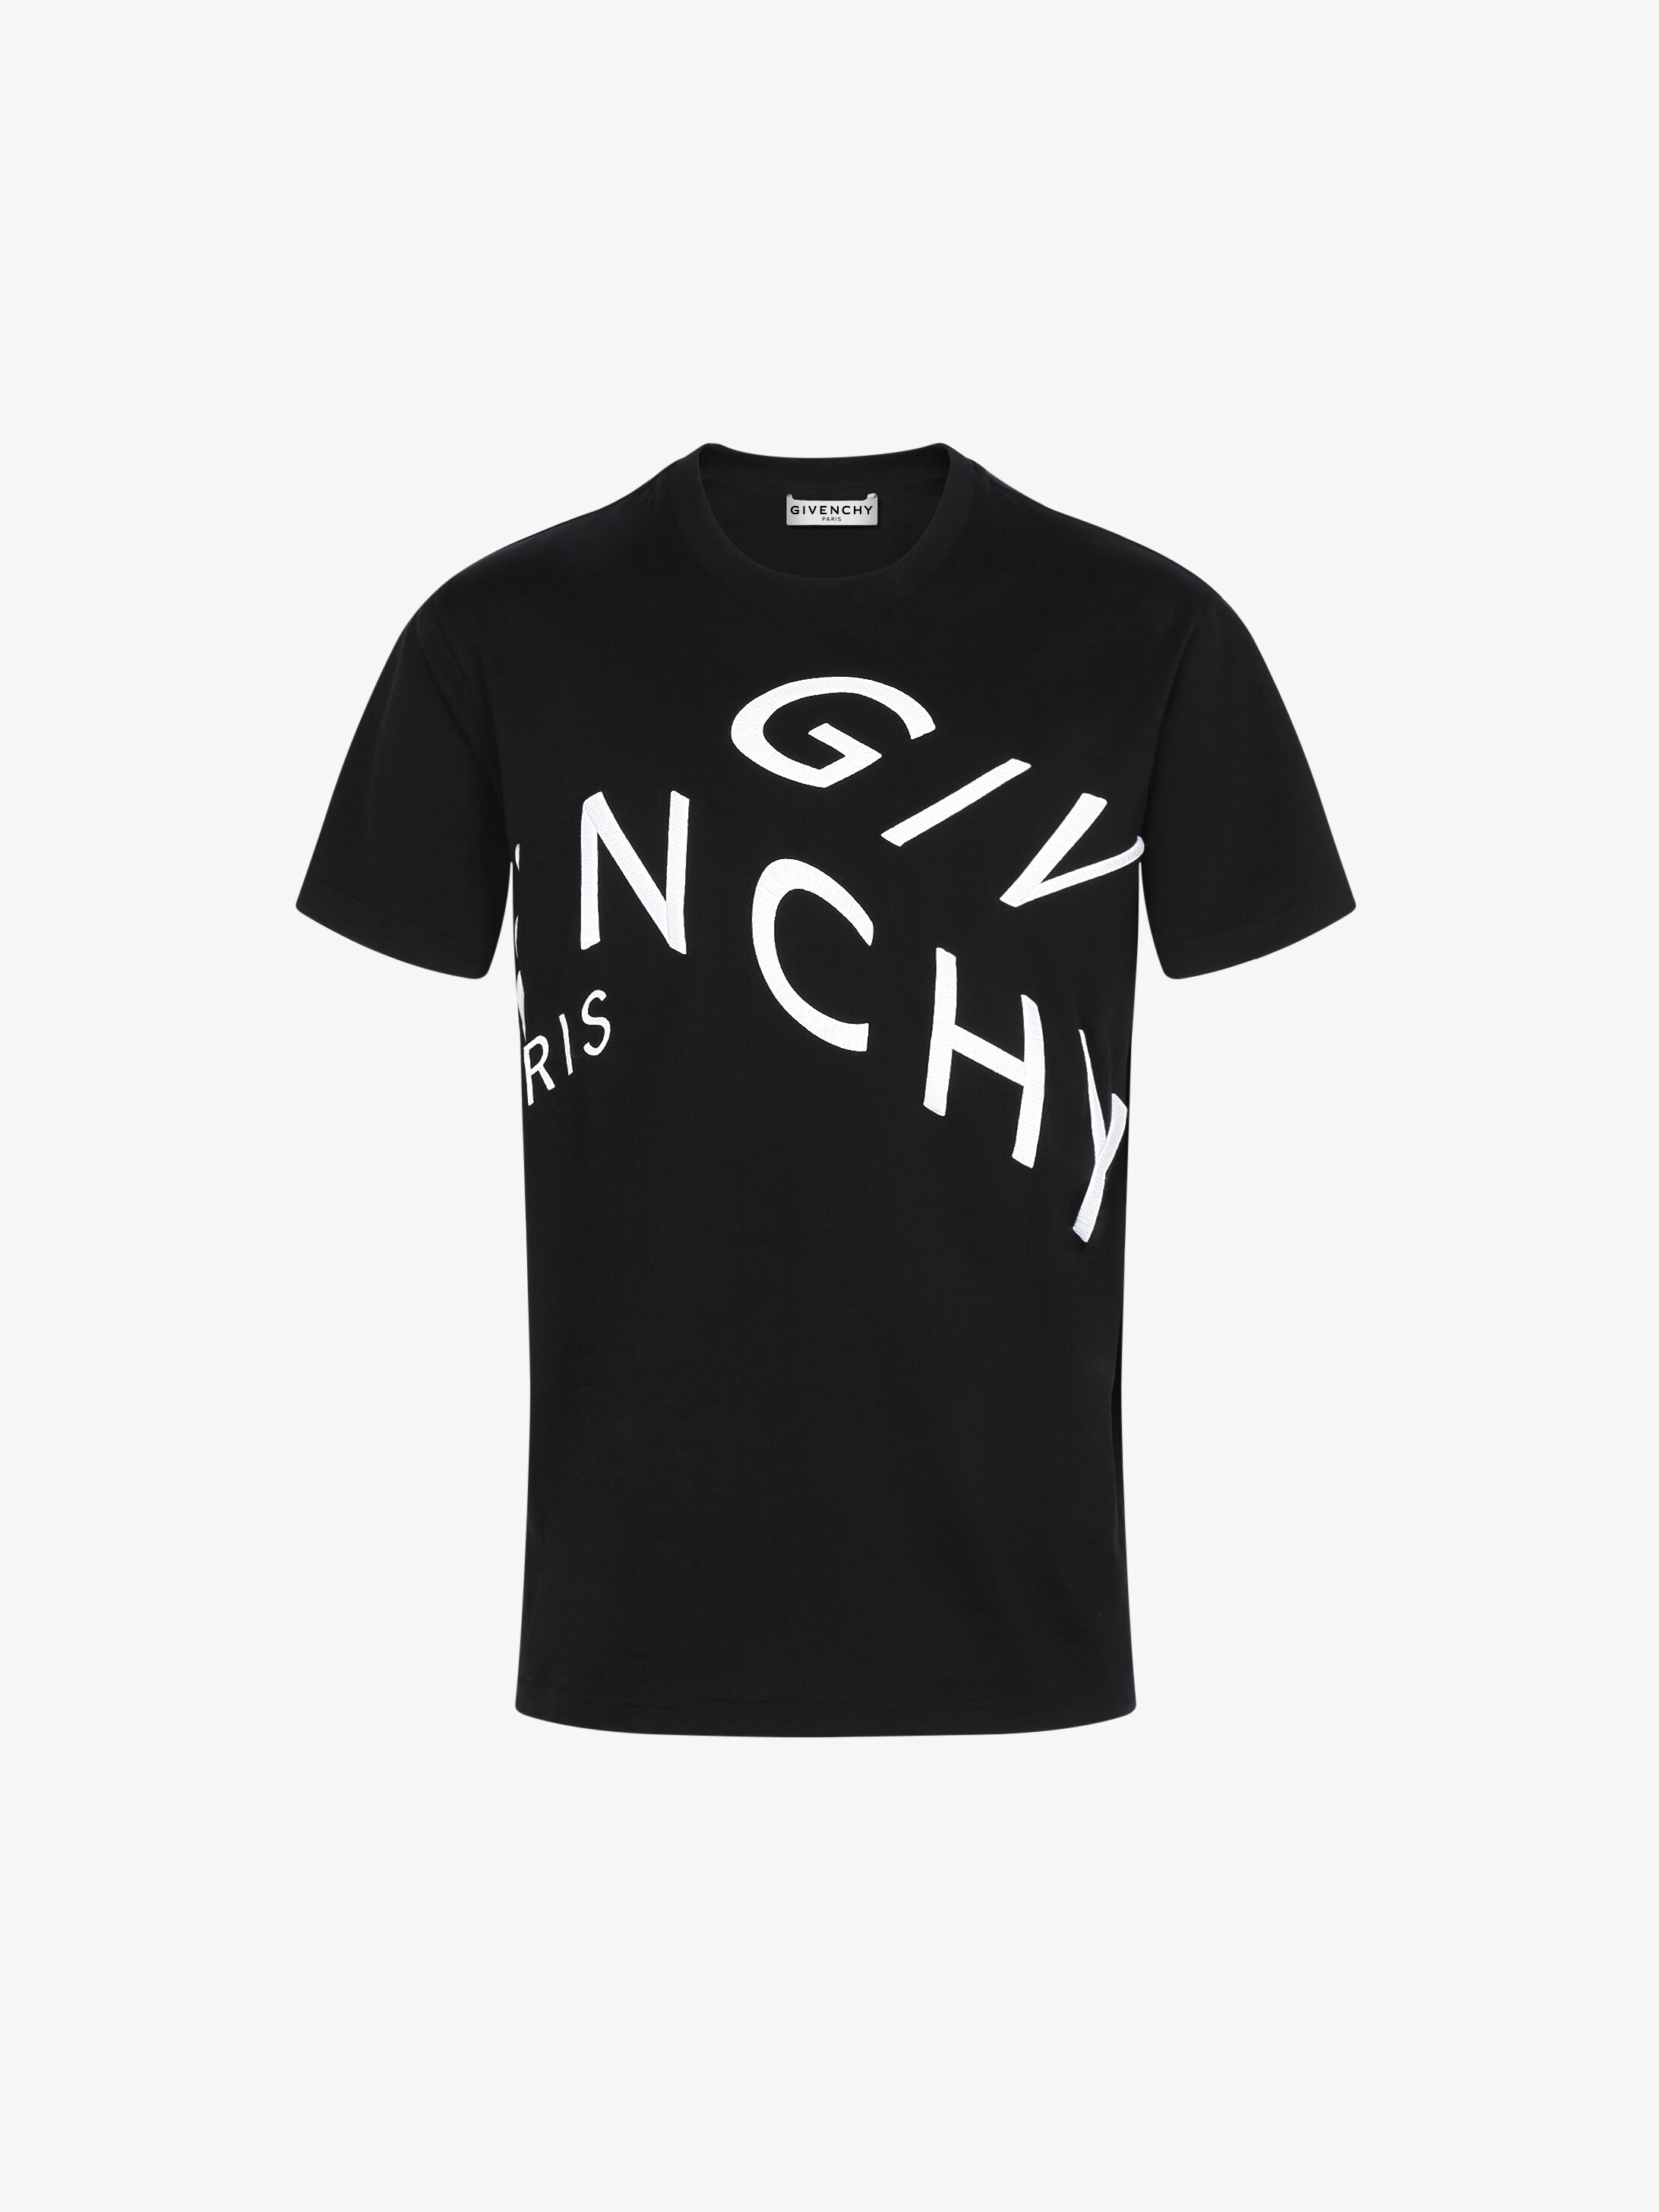 givenchy t shirt online india